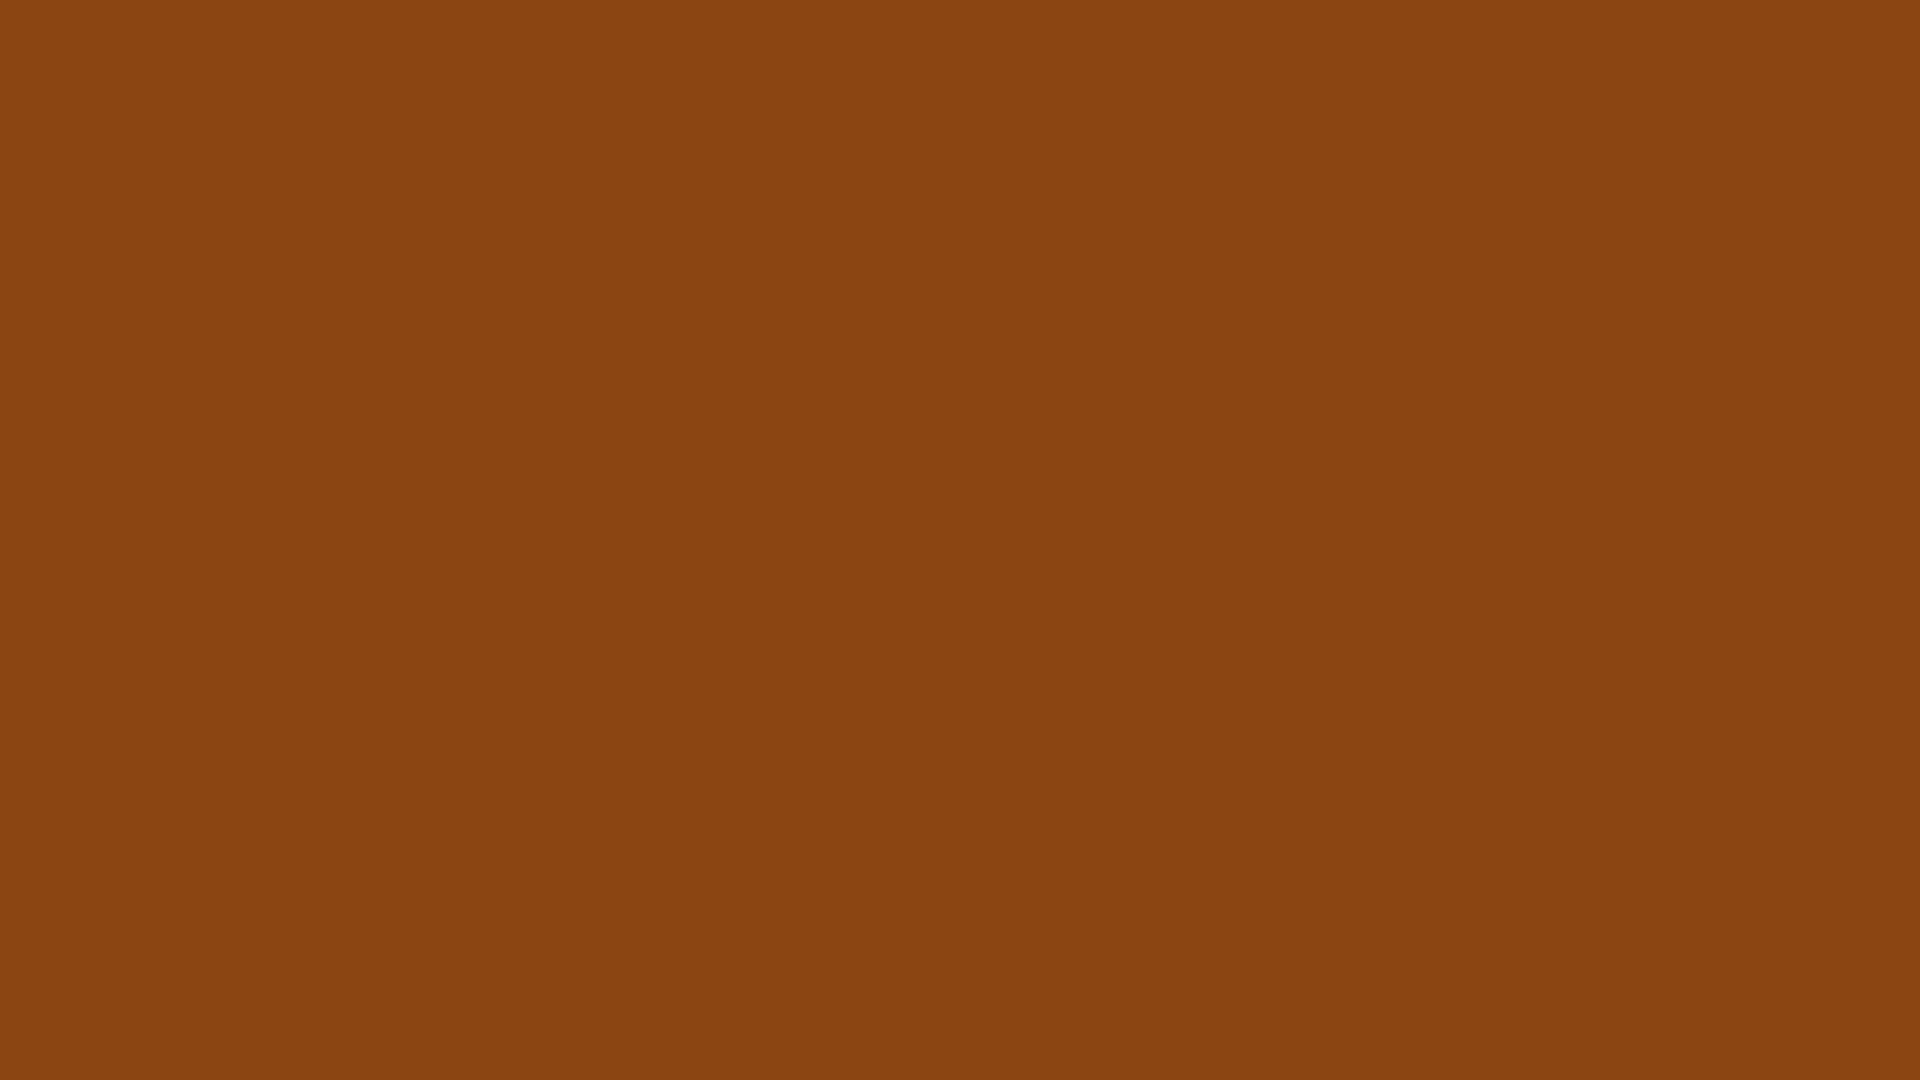 1920x1080 Saddle Brown Solid Color Background